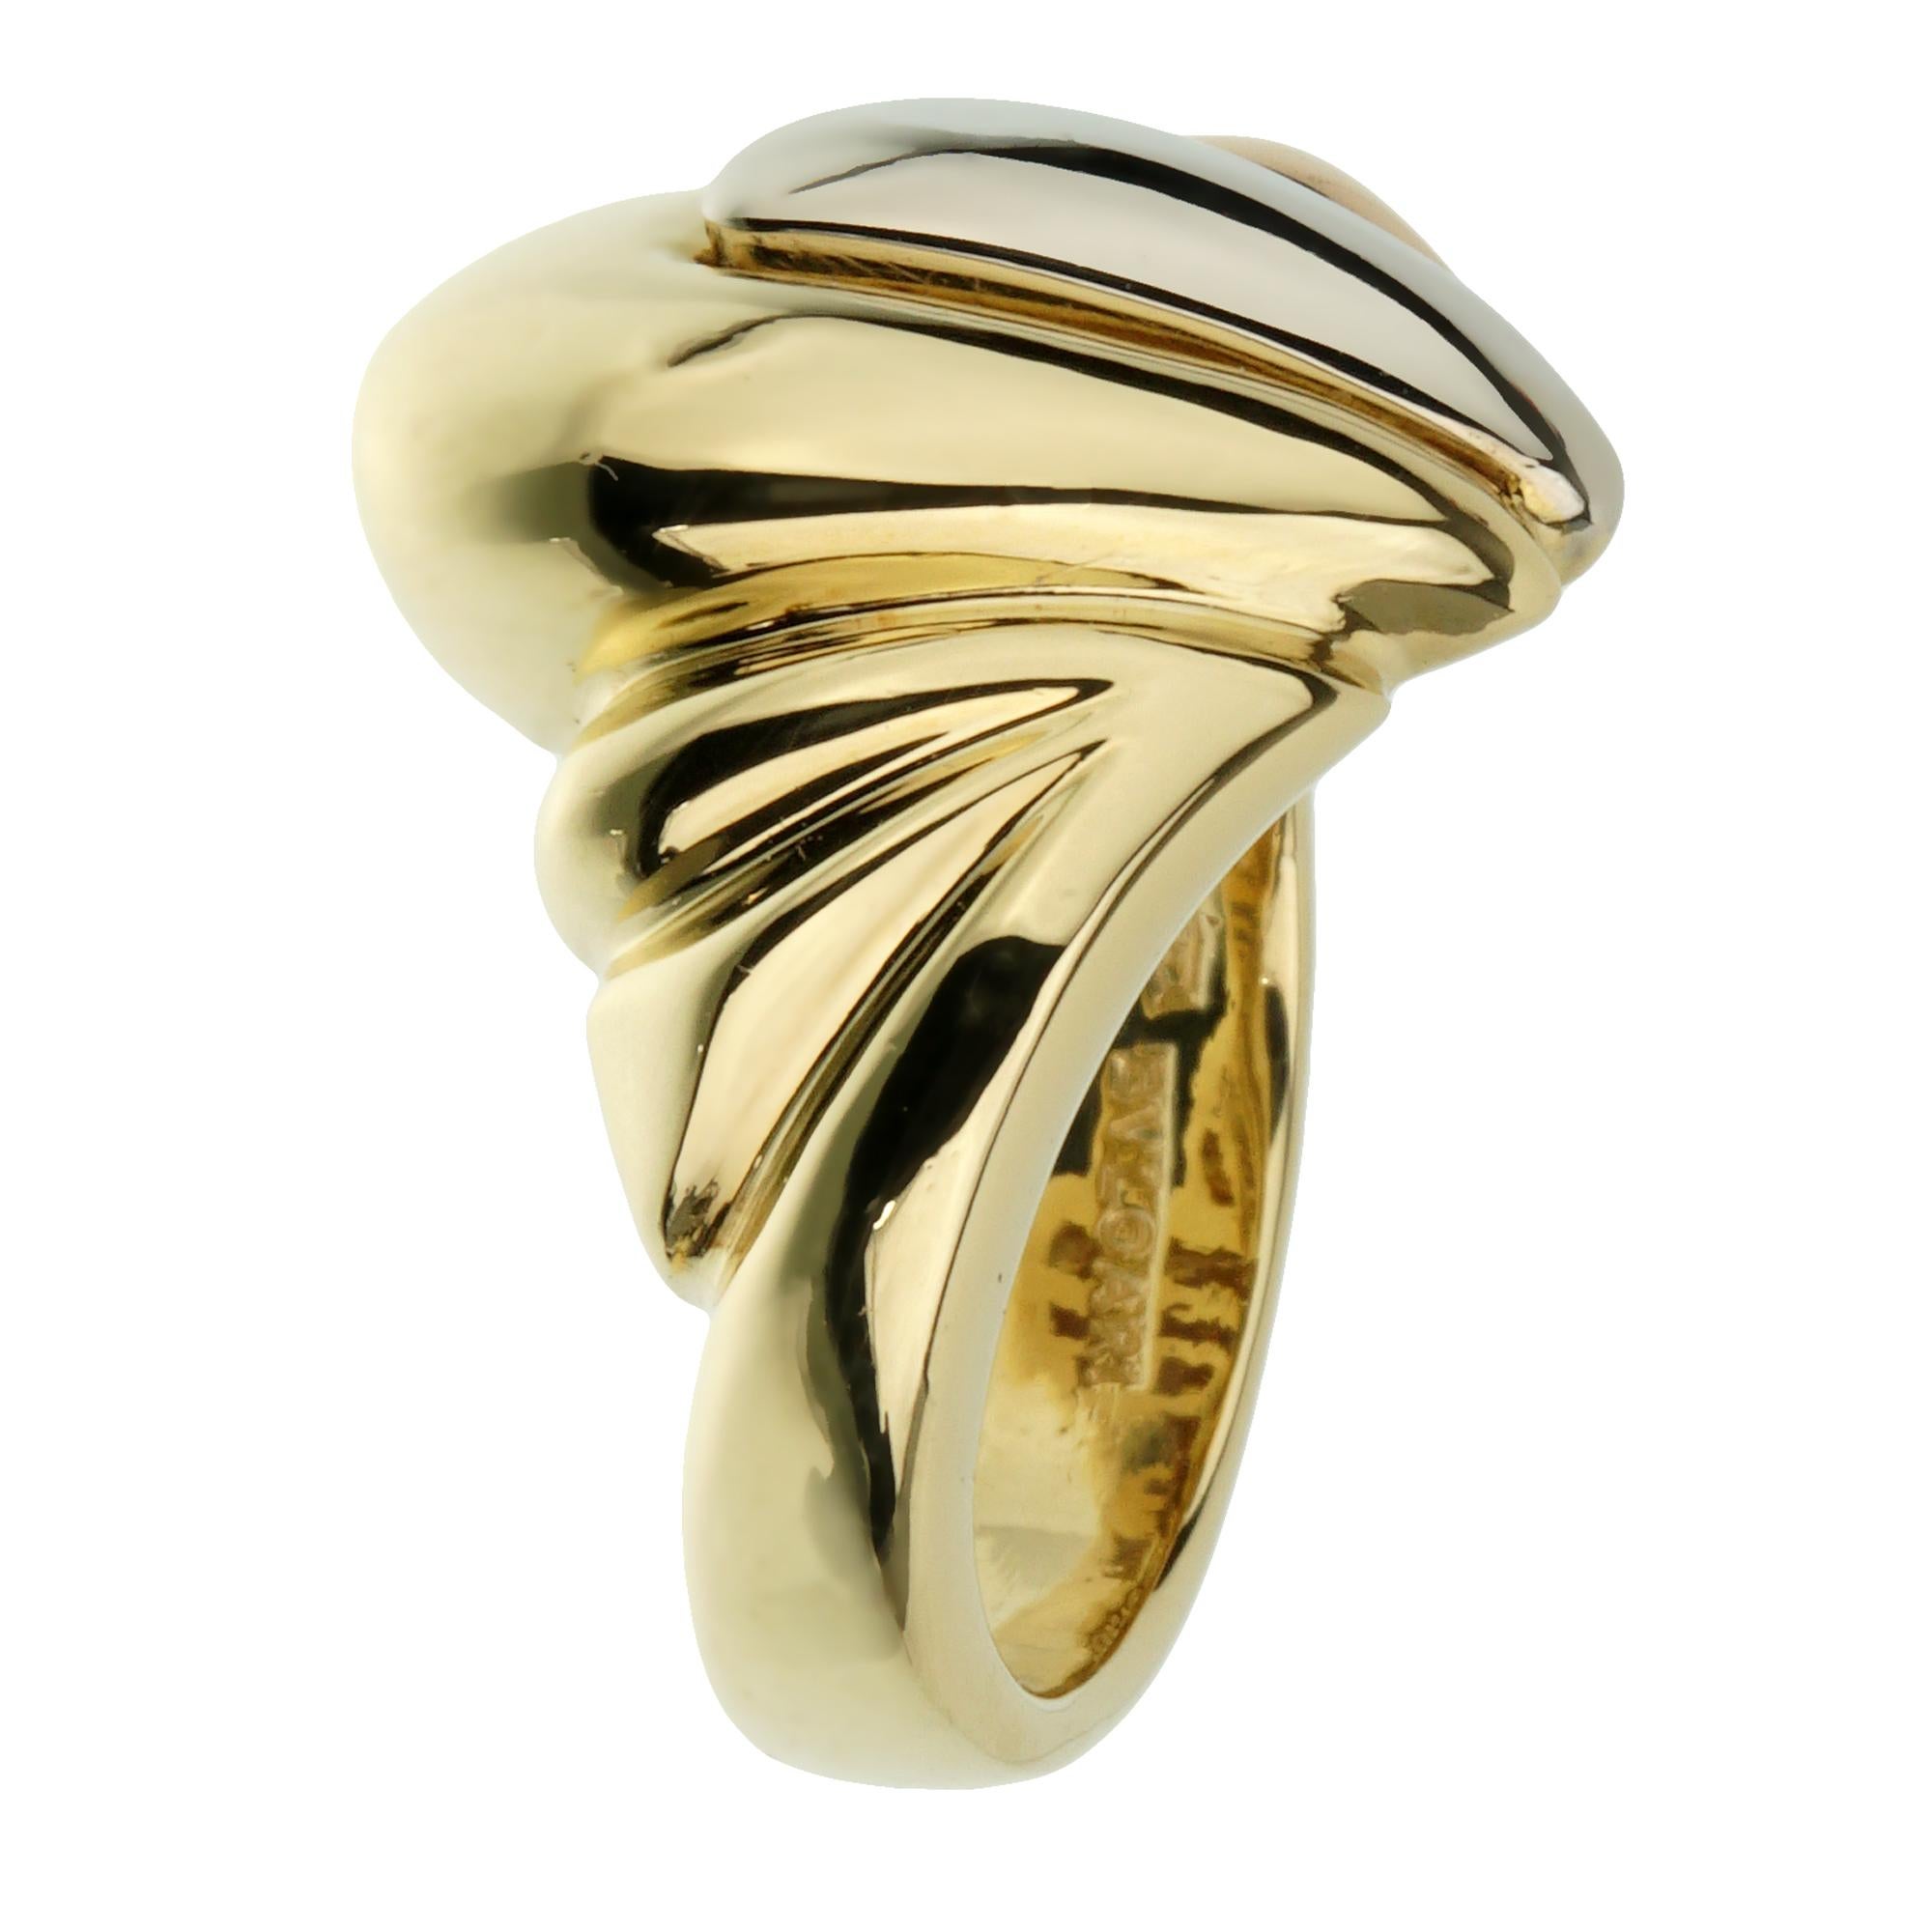 Introducing the Bvlgari Vintage Tricolor Gold Cocktail Ring, a magnificent fusion of timeless design and unparalleled craftsmanship that embodies the essence of the iconic Bvlgari brand. This exquisite piece showcases an intricate tricolor gold